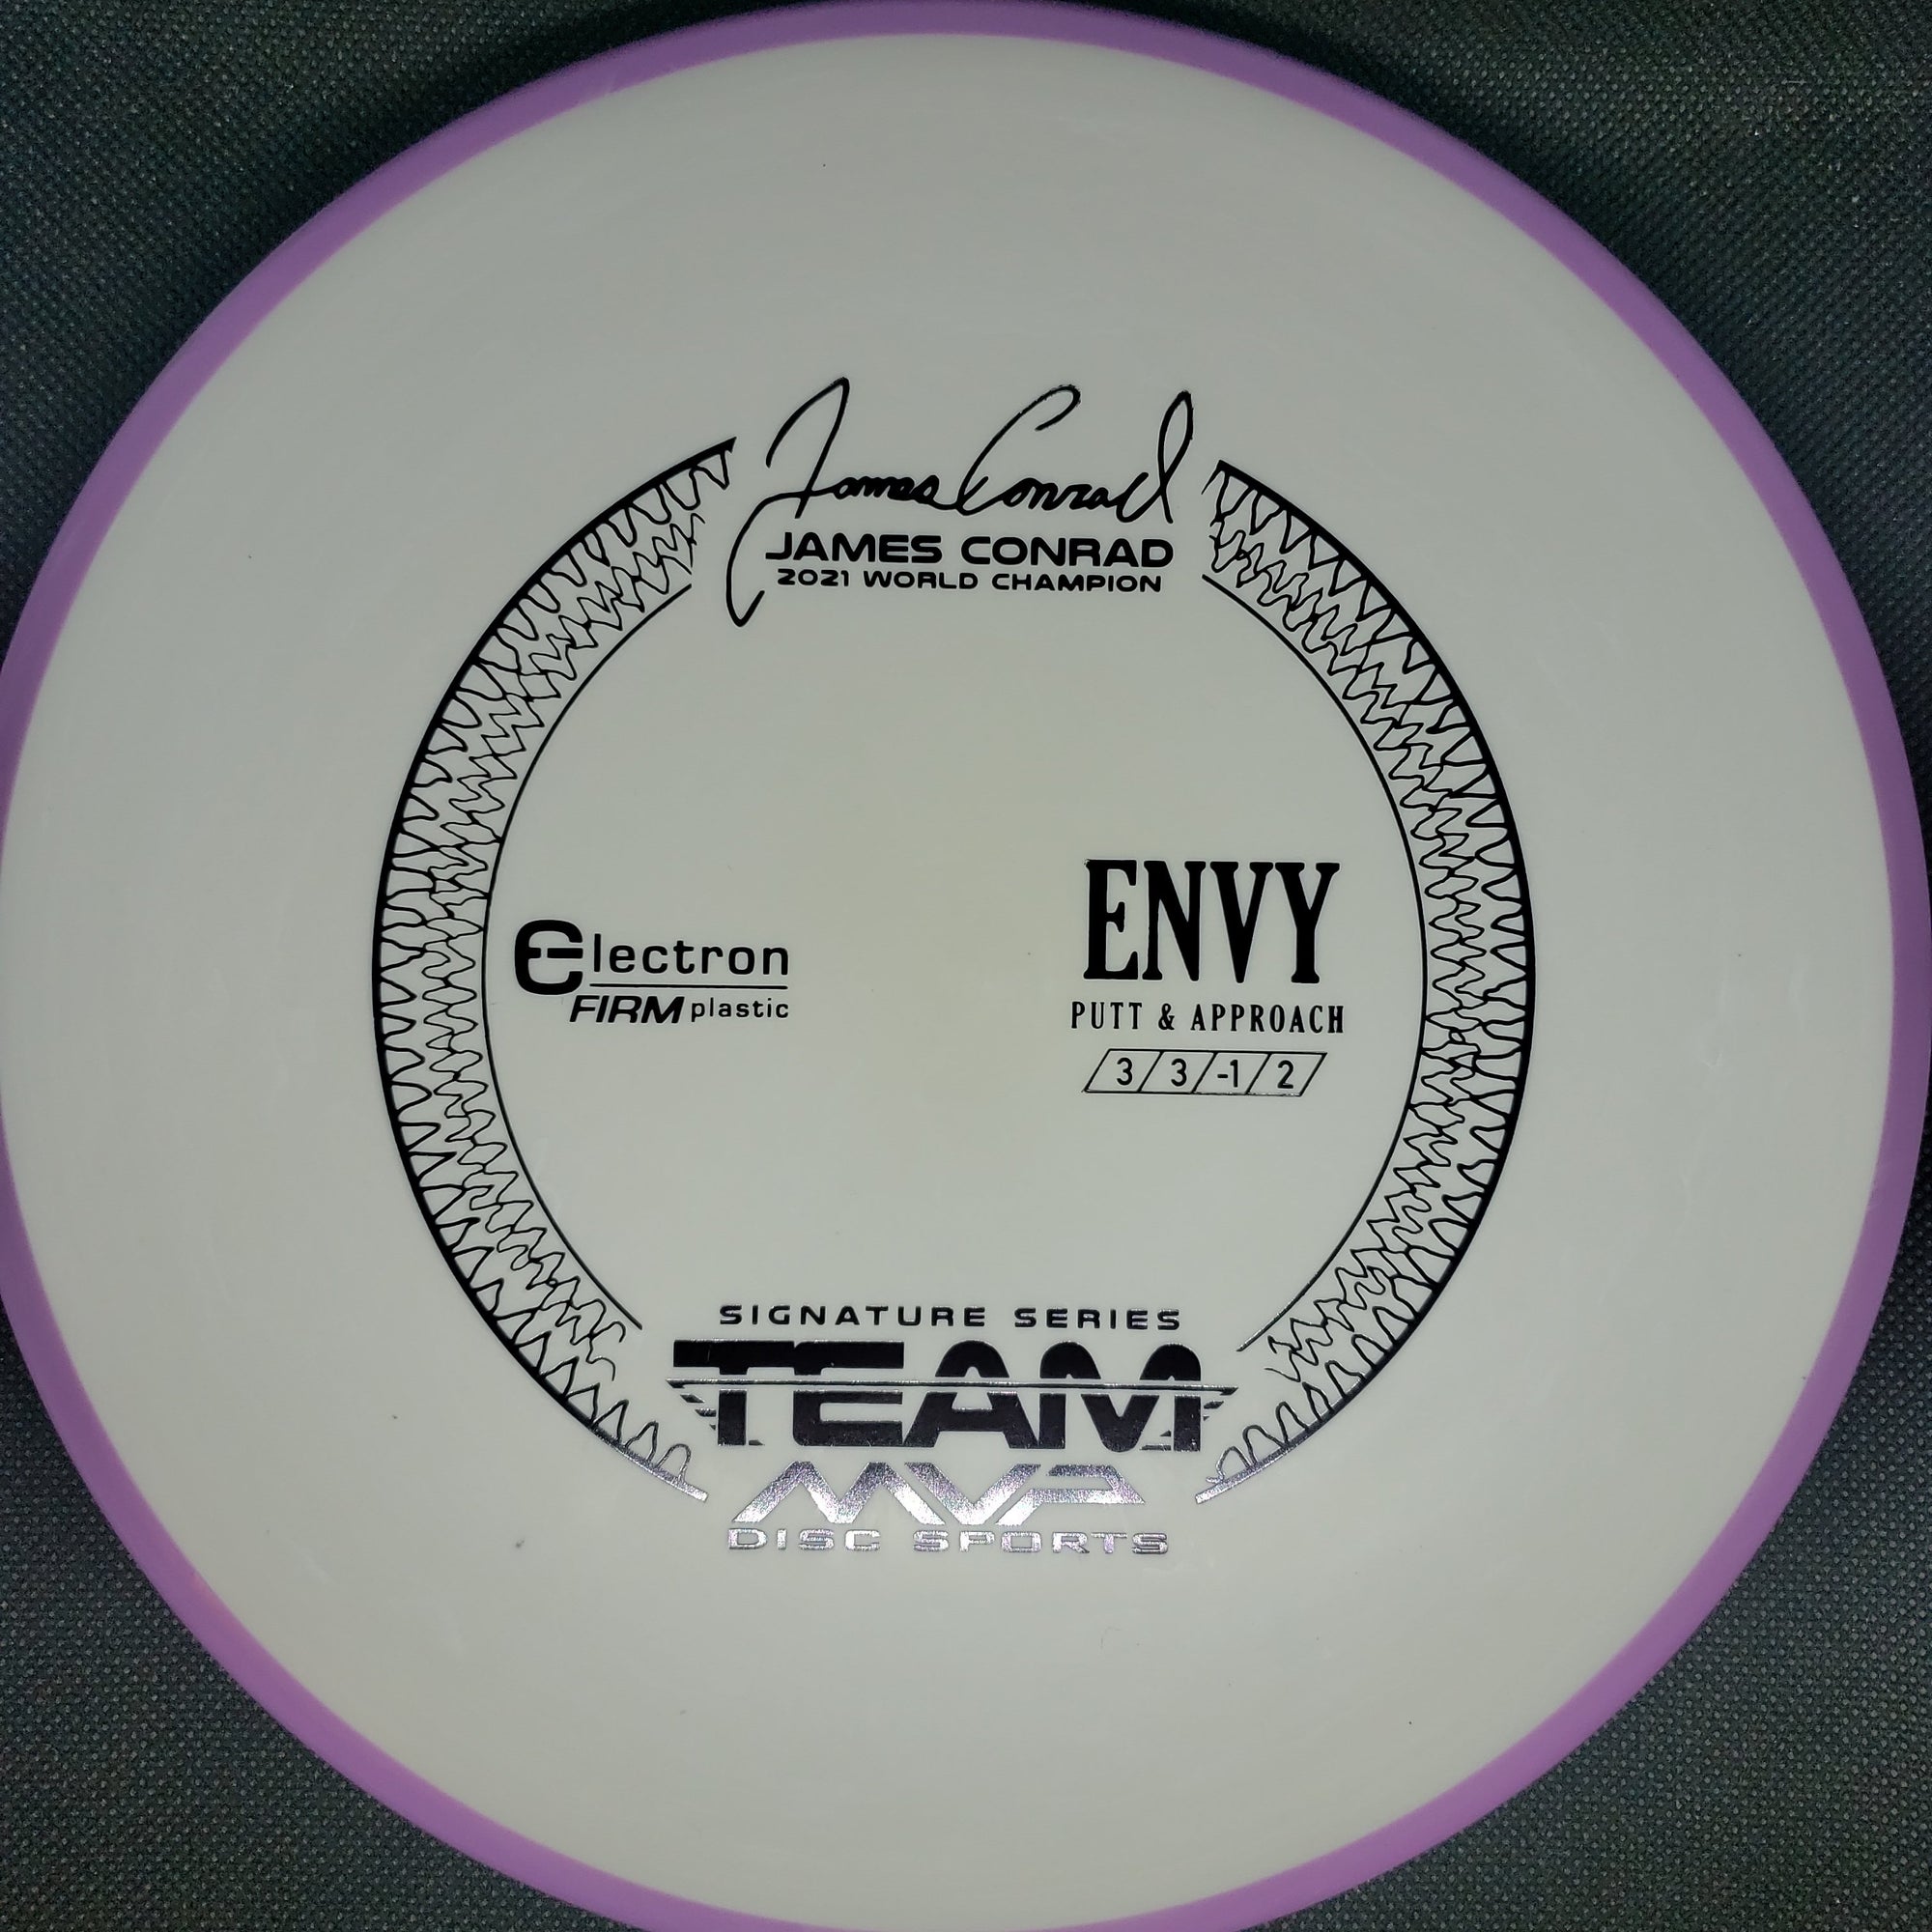 MVP Putter Products James Conrad Signature Envy, Electron Firm